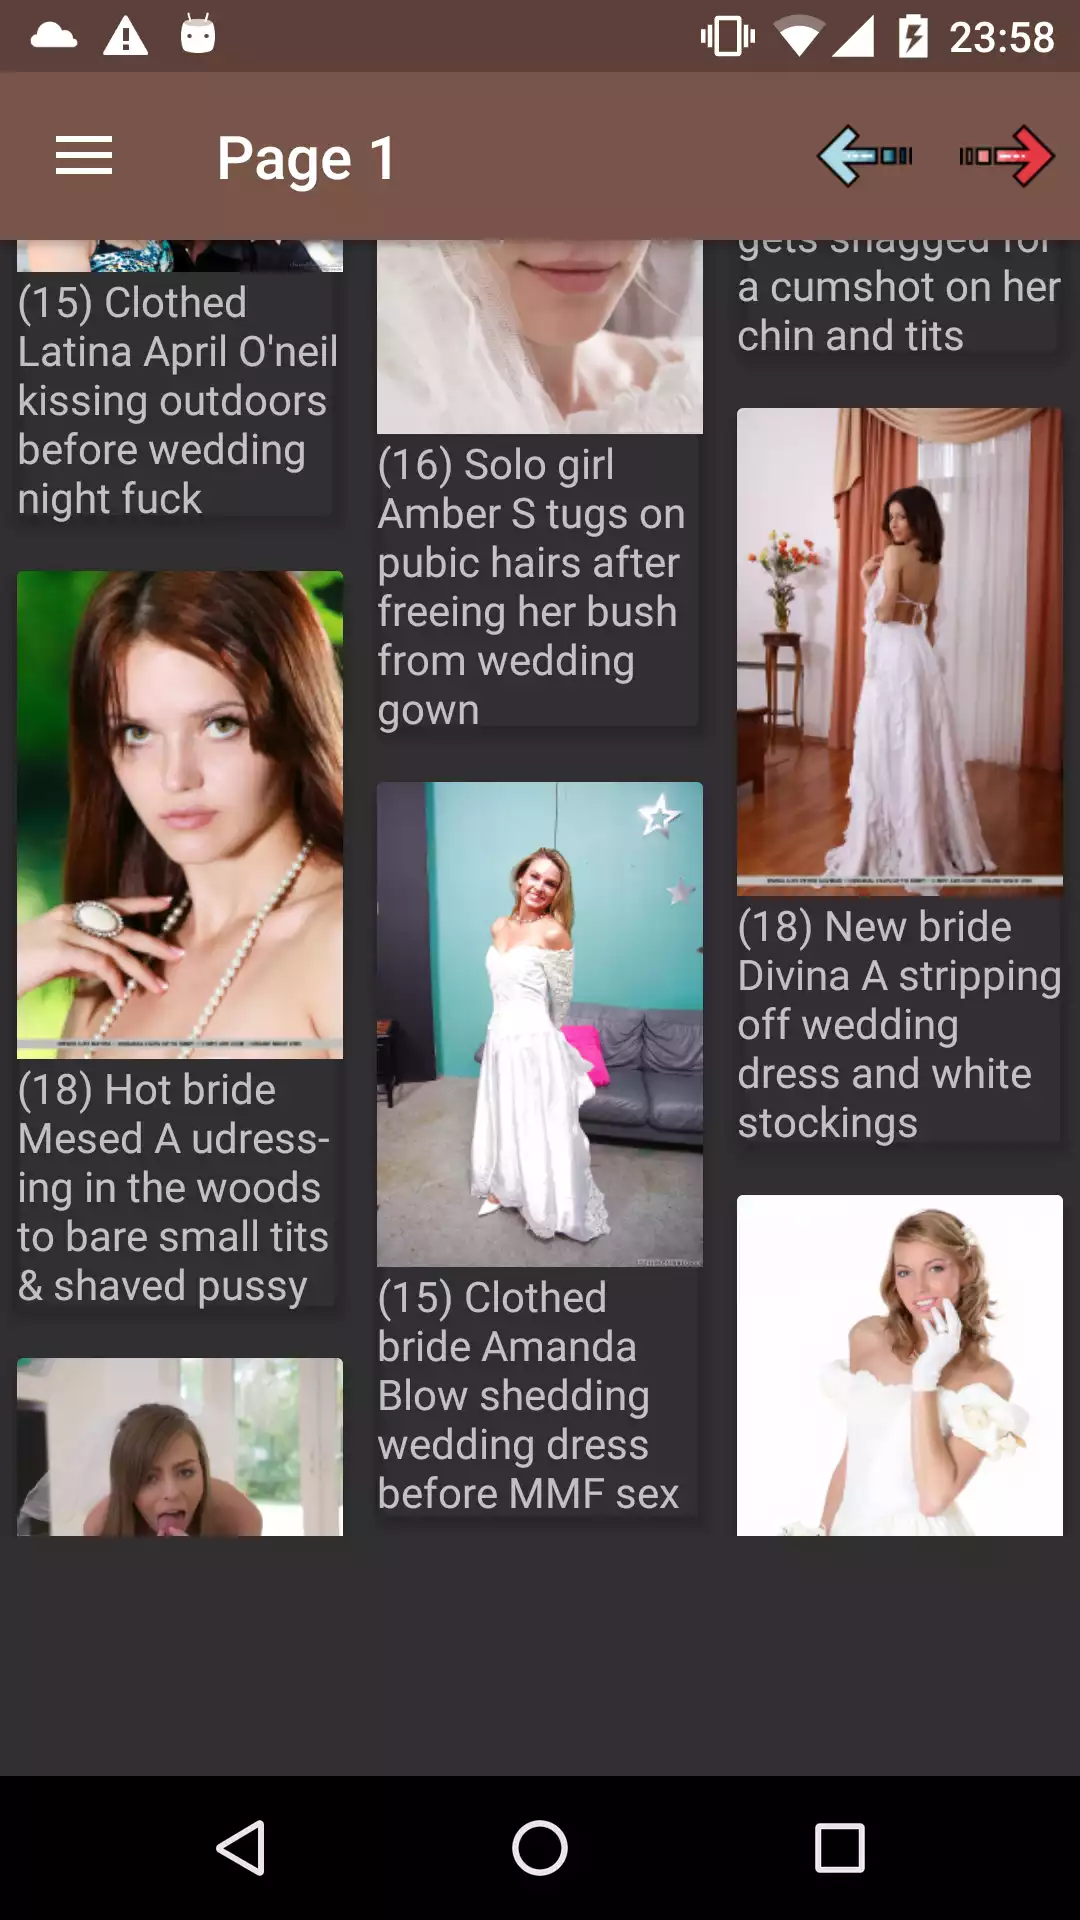 Wedding Galleries hentai,hentaipics,apps,sexy,galleries,photos,for,porn,phone,photo,pic,gallery,app,best,picture,android,shemales,femboy,new,editor,apk,wallpaper